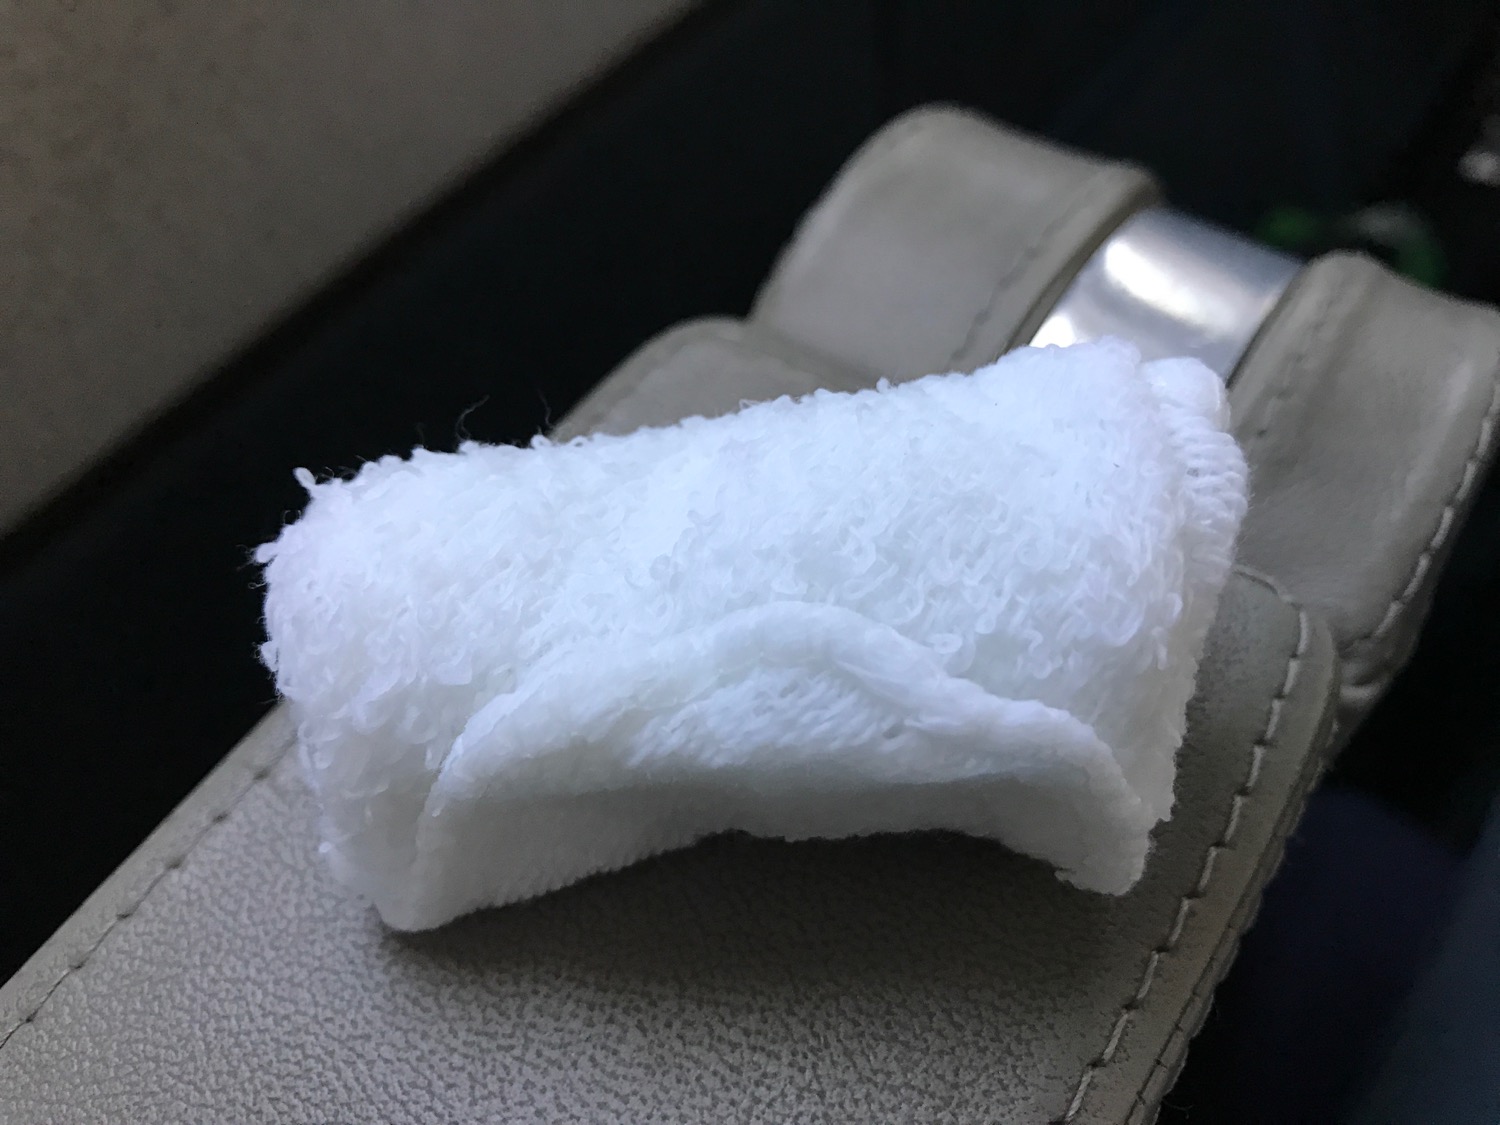 a white towel on a leather strap